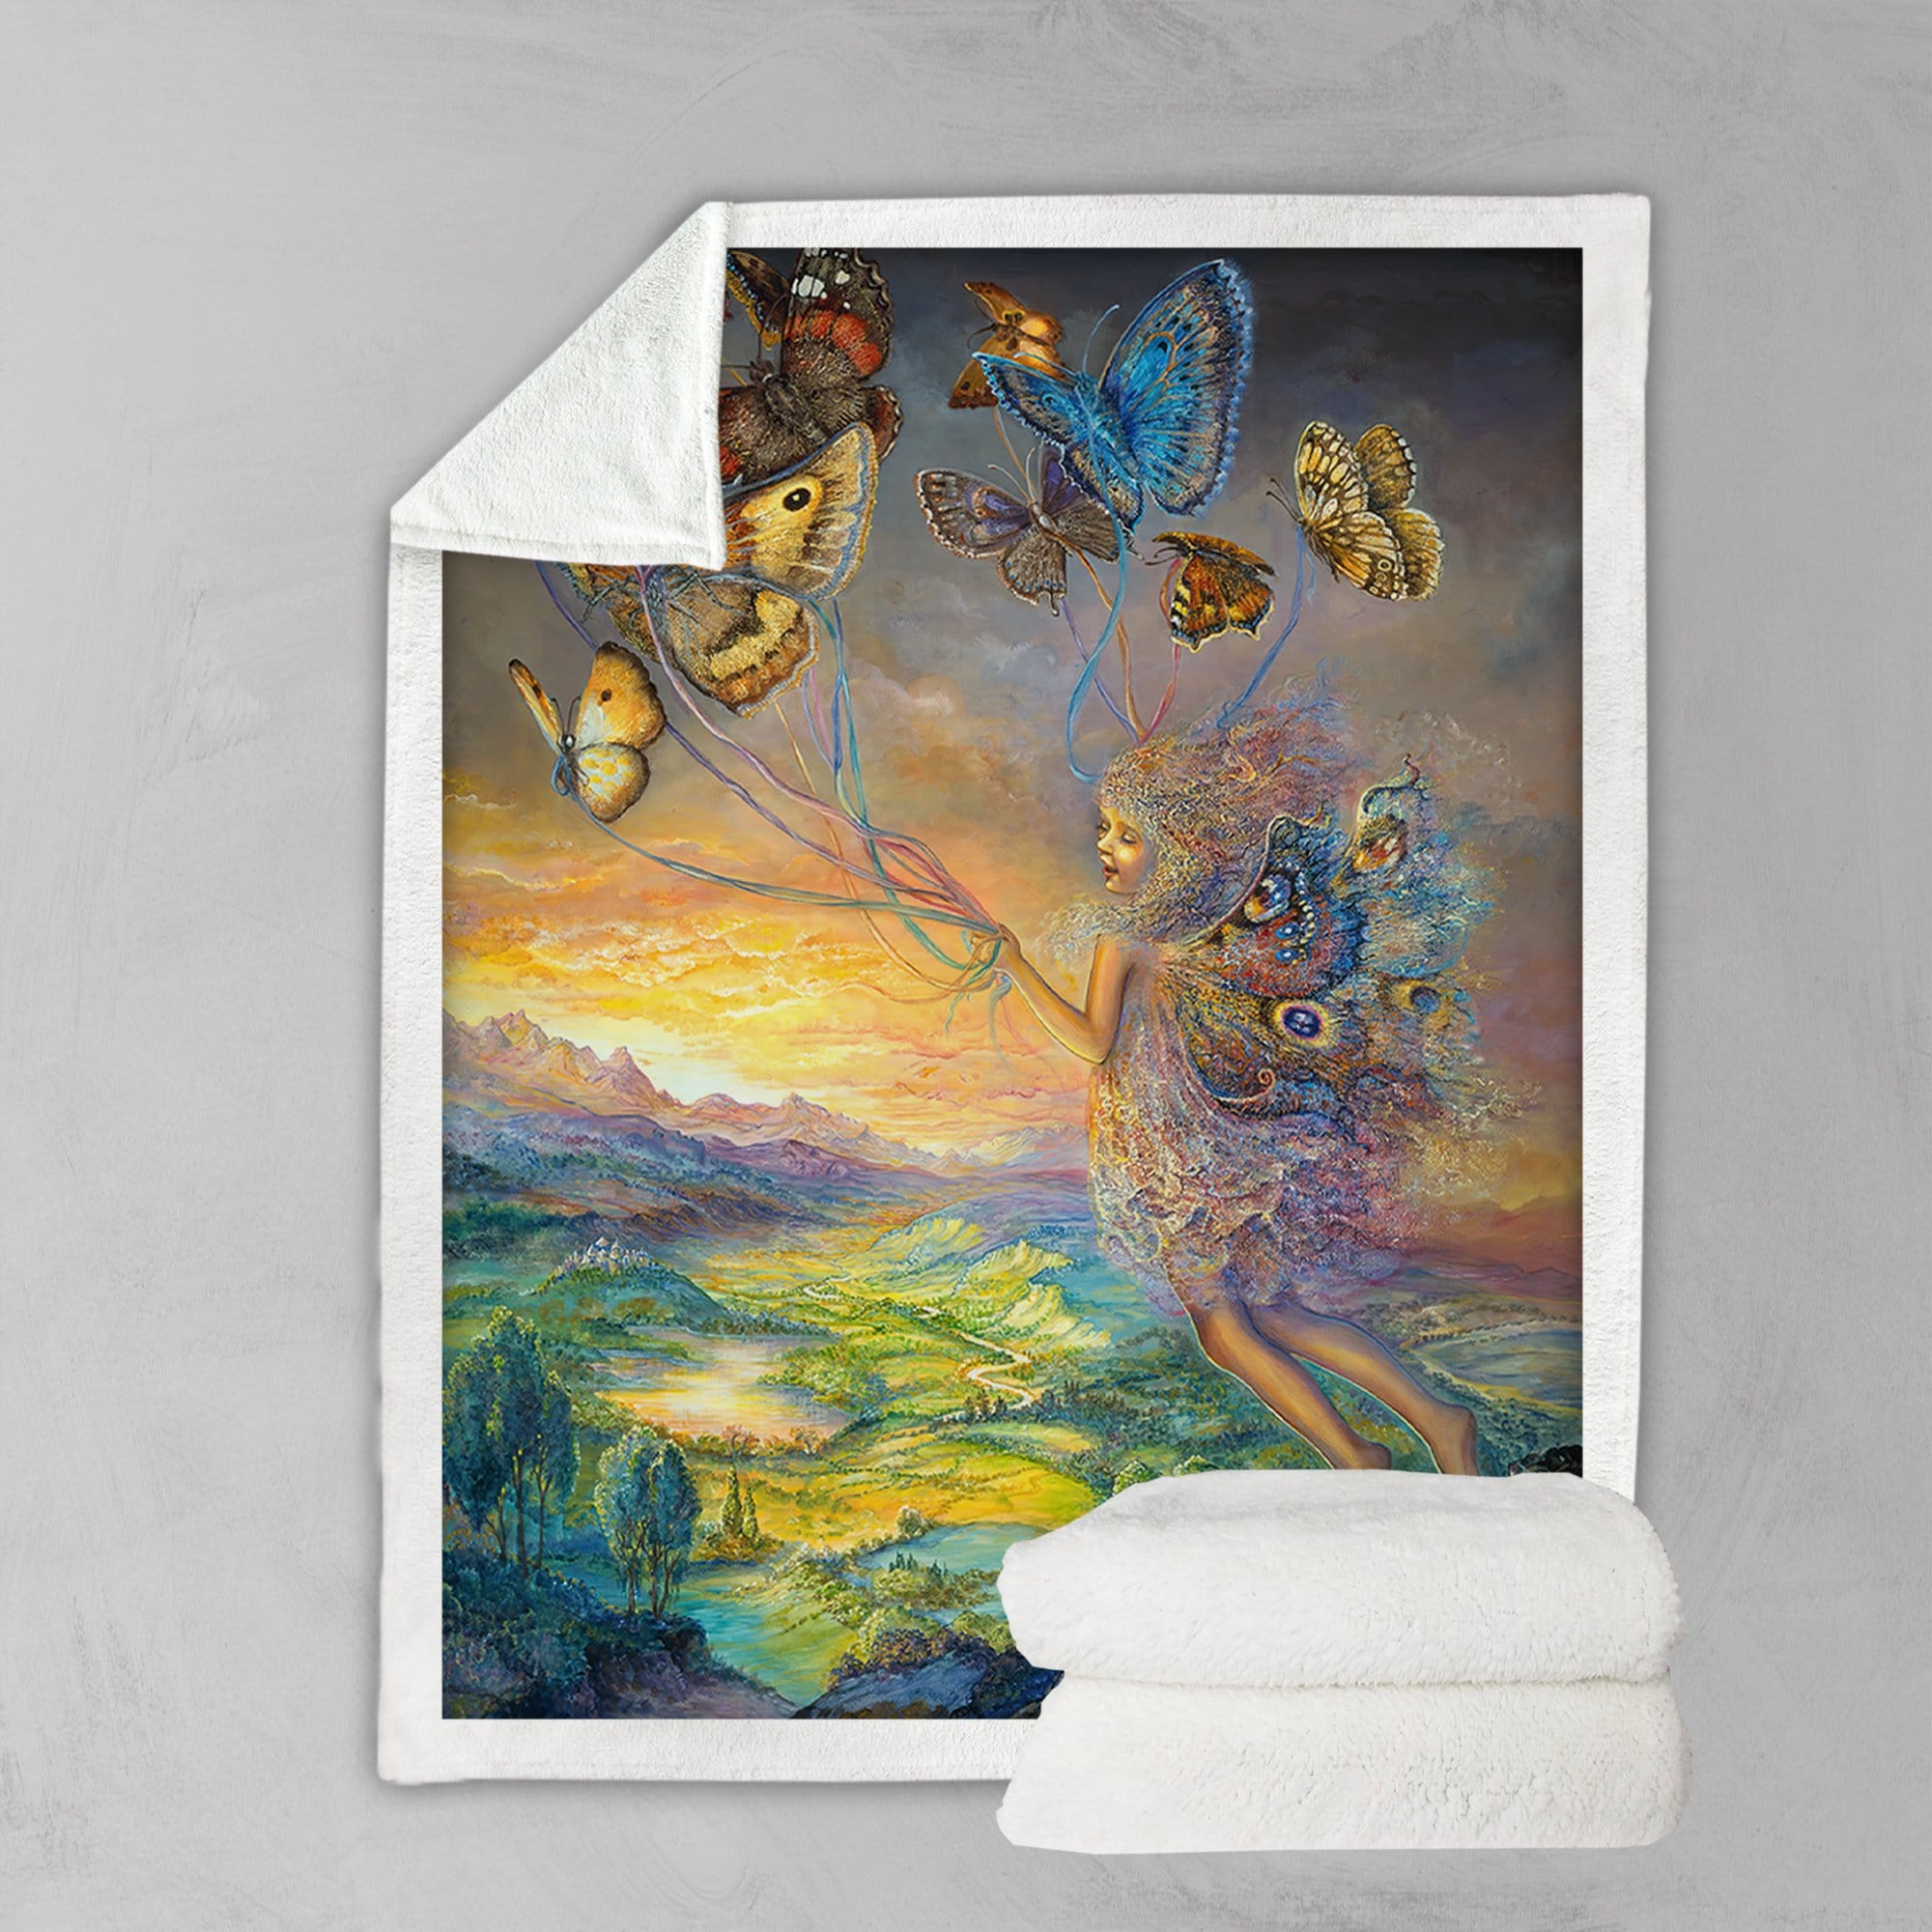 Josephine Wall Up And Away Blanket